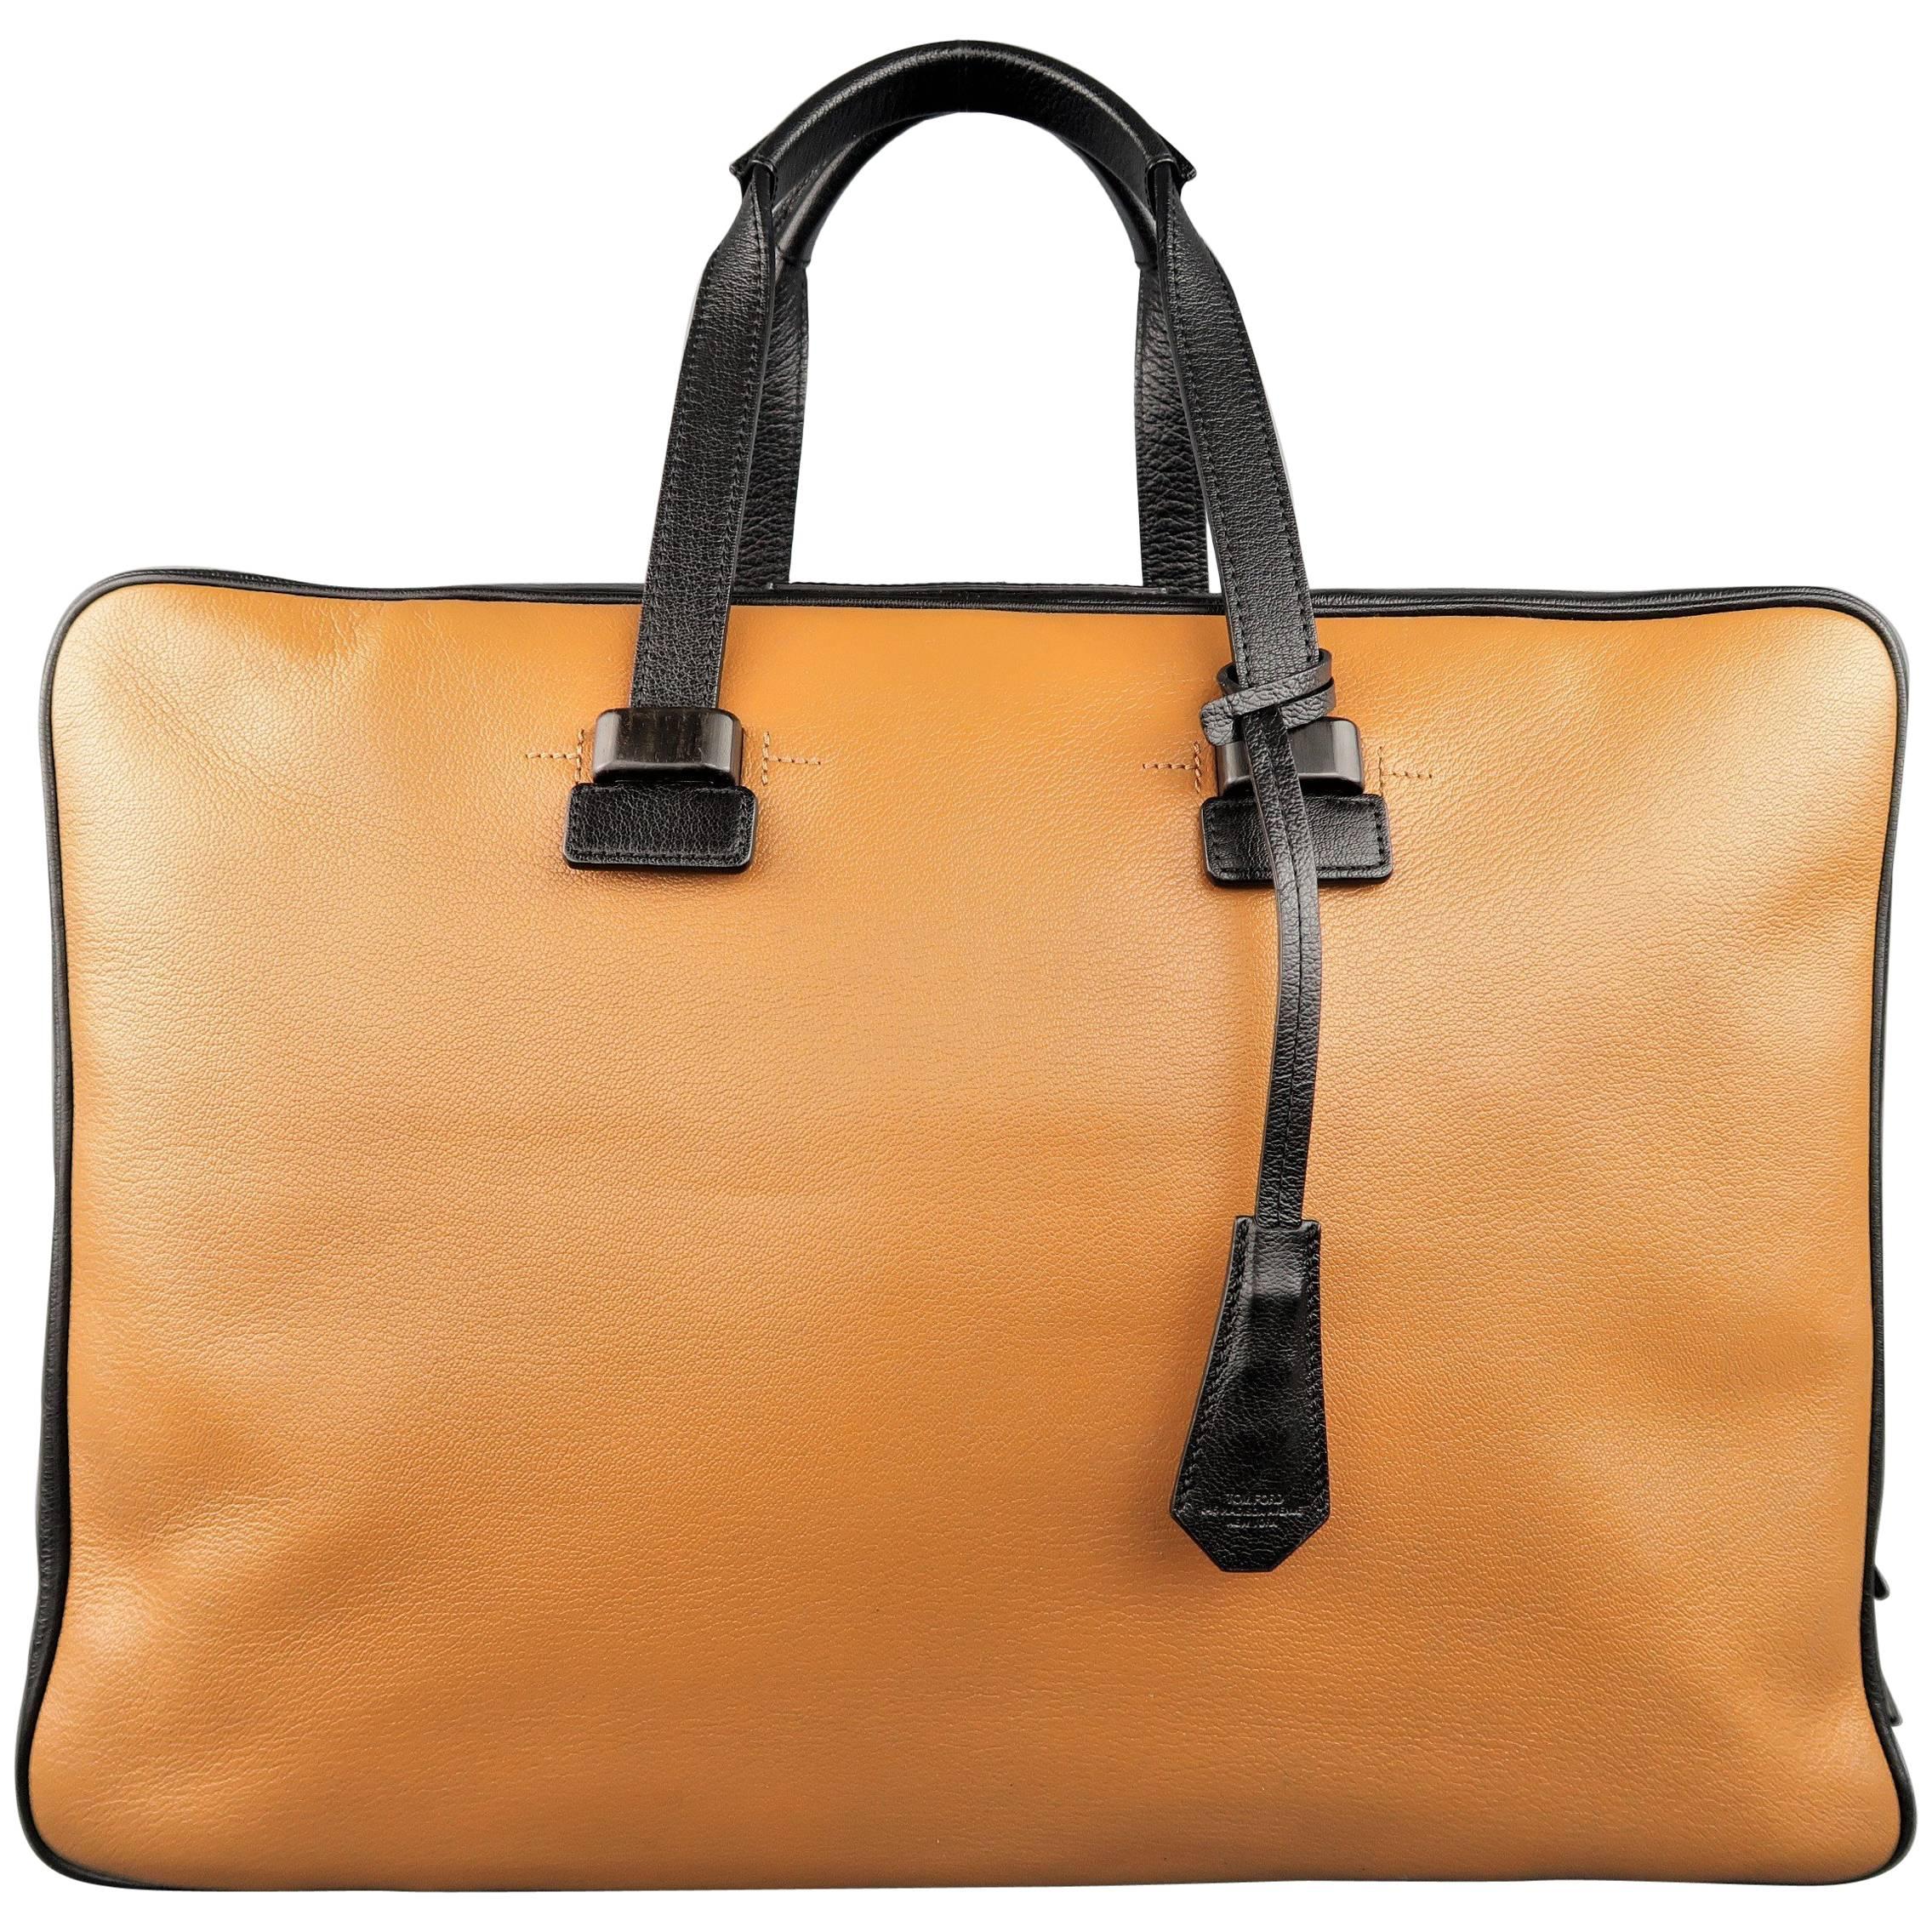 Tom Ford Tan and Black Pebbled Leather Travel Carry-On Briefcase 